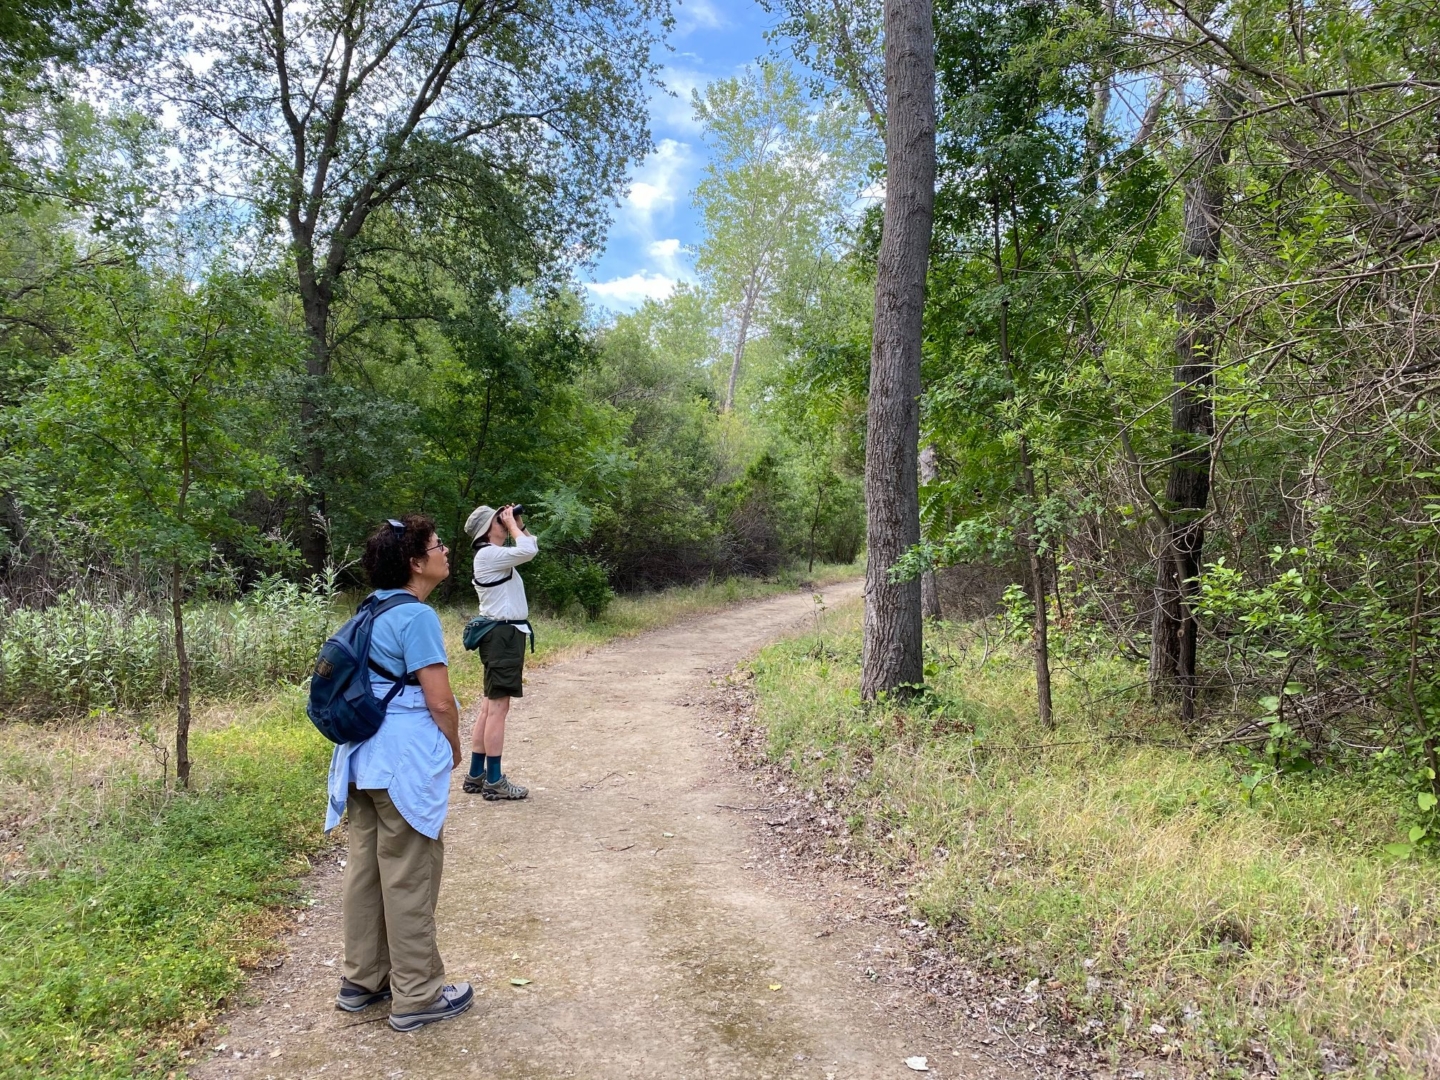 Two individuals stare up into the trees while on a dirt path of a riparian area.